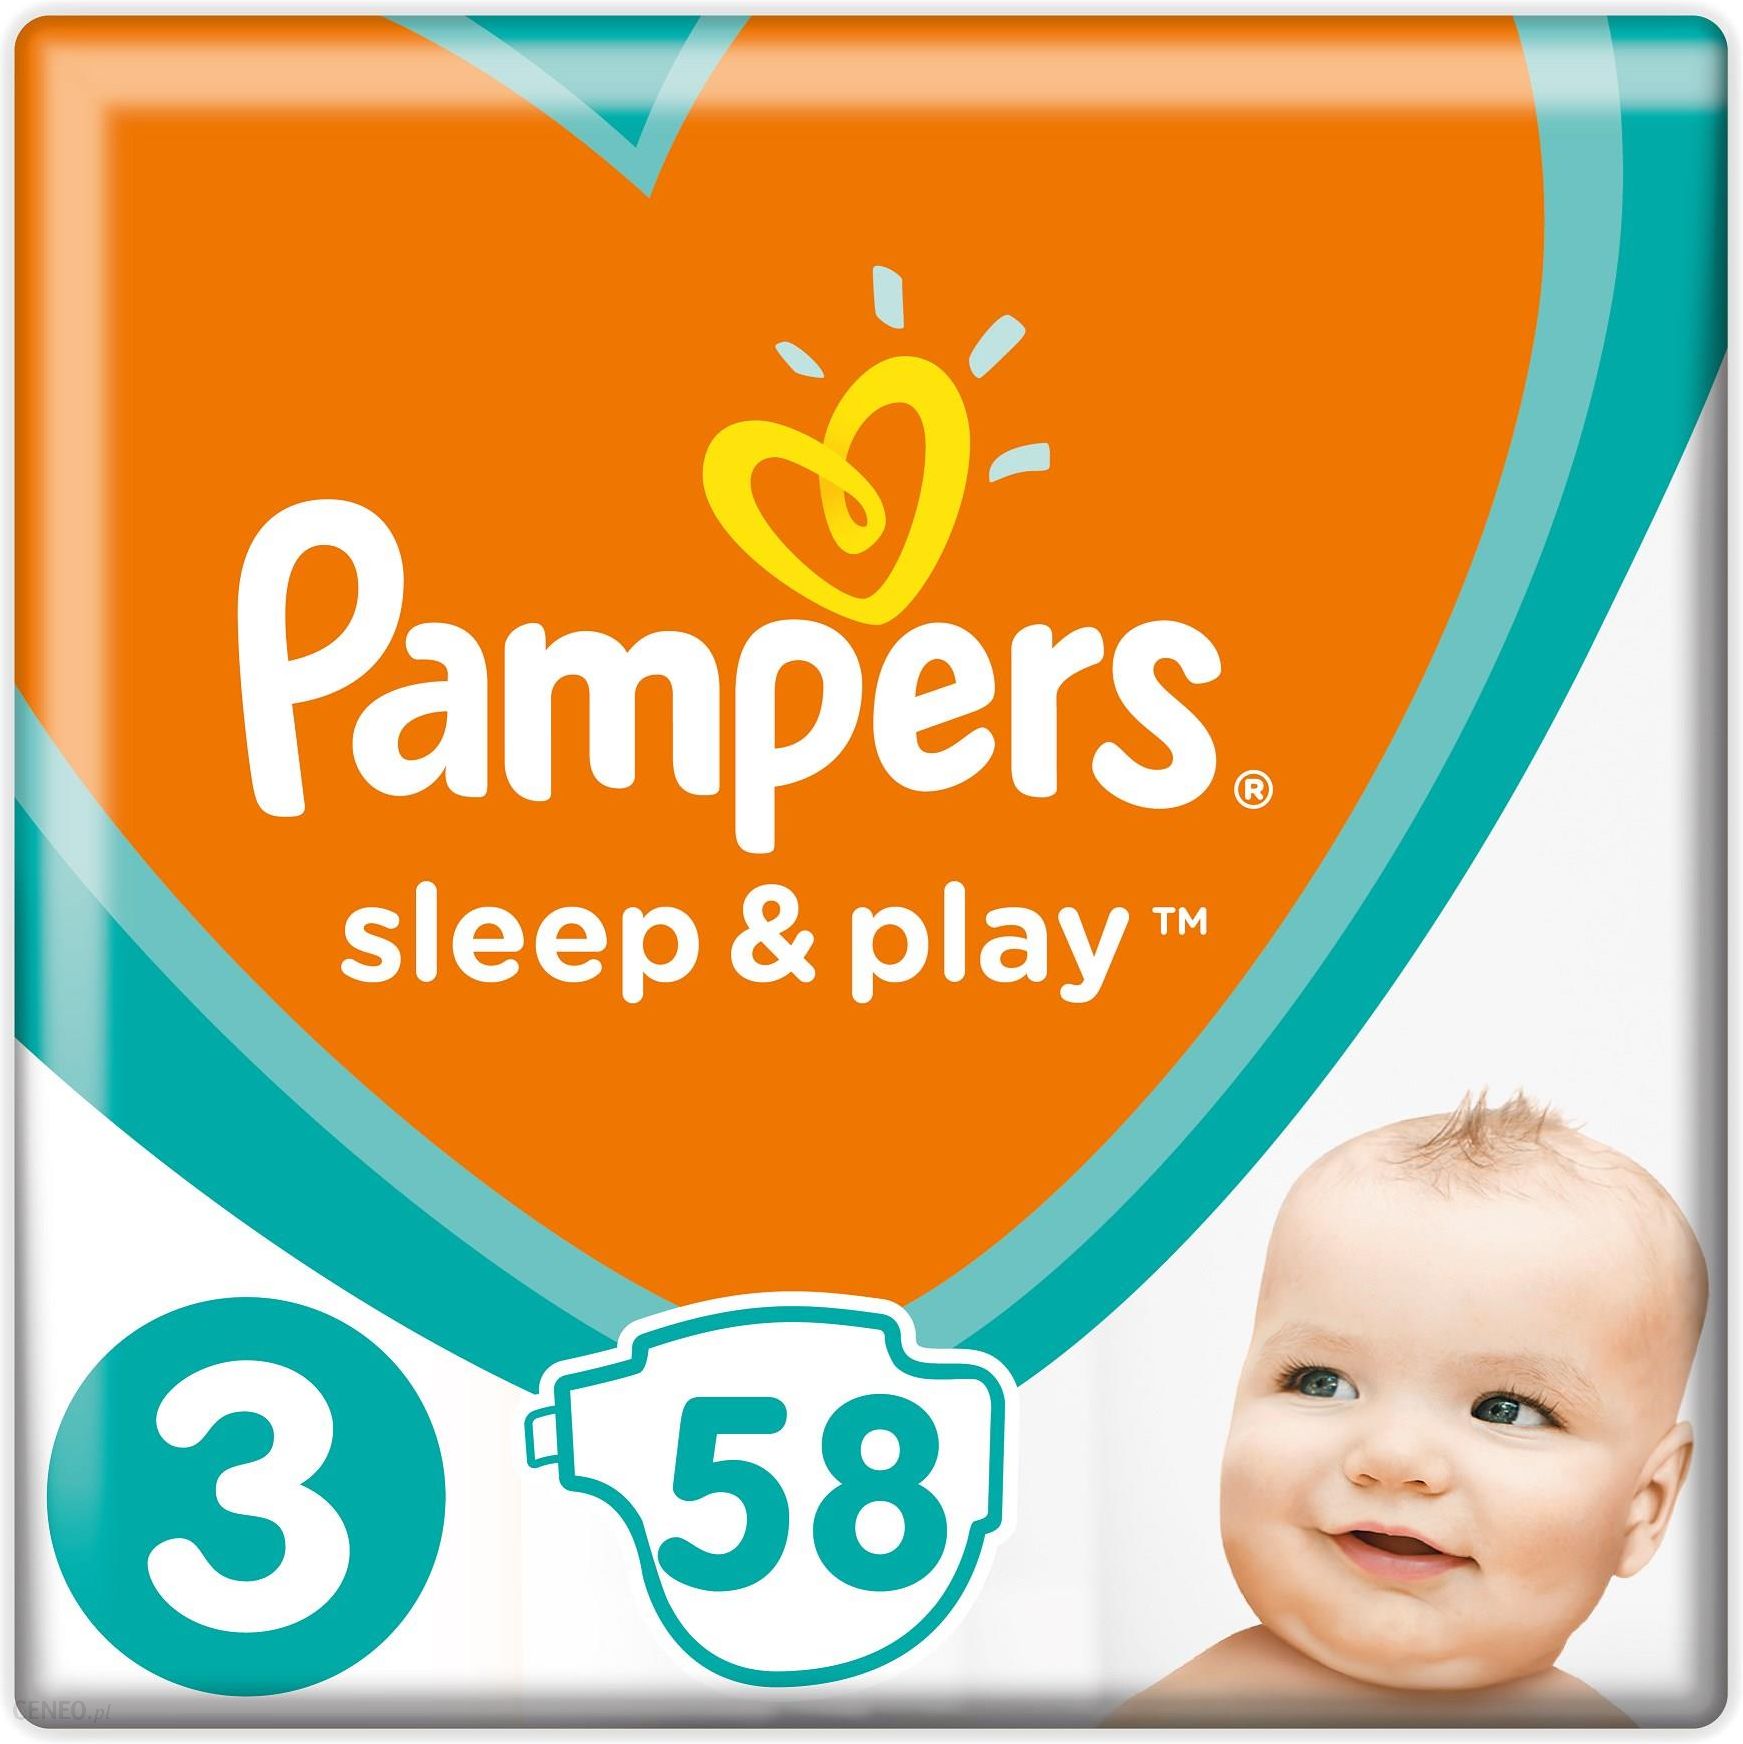 pampers new baby 43 szt